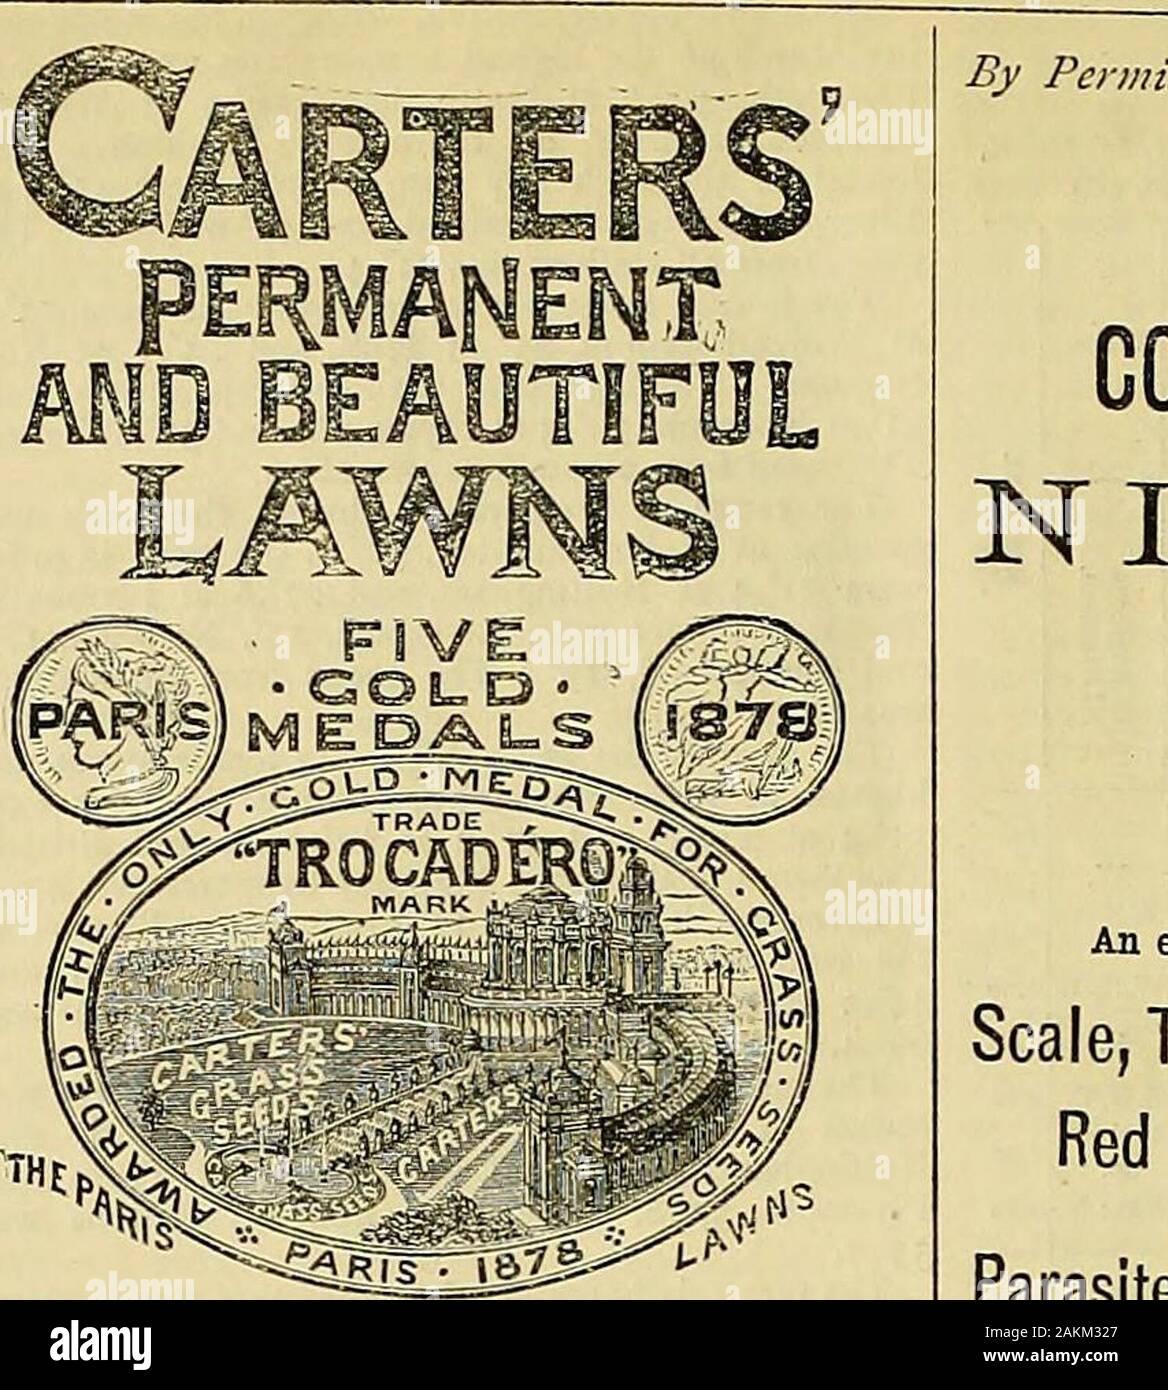 The Gardeners' chronicle : a weekly illustrated journal of horticulture and allied subjects . reds, 4J-. to5J. dd. per bag.—The imports into London last weekwere :—290 bags Bordeaux, 1312 bags Boulogne, 107bags Dunkirk, 1891 bags Ghent, 38,605 bags 200 basketsHamburgh, 1502 bags Antwerp, 40 bags Harlingen, and105 tons Roscoff. COALS. The following are the prices current at market duringthe week :—Bebside West Hartley, 14J. ^d. ; EastWylam, i6j. (id. Walls End—Hetton, i6j. 6d. and js.;Hetton Lyons, 155. and i5J-. 6d. ; Original Hartlepool,i6j. 6(/. and 17^.; South Hetton, 16^. td. and 17^.;Ha Stock Photo